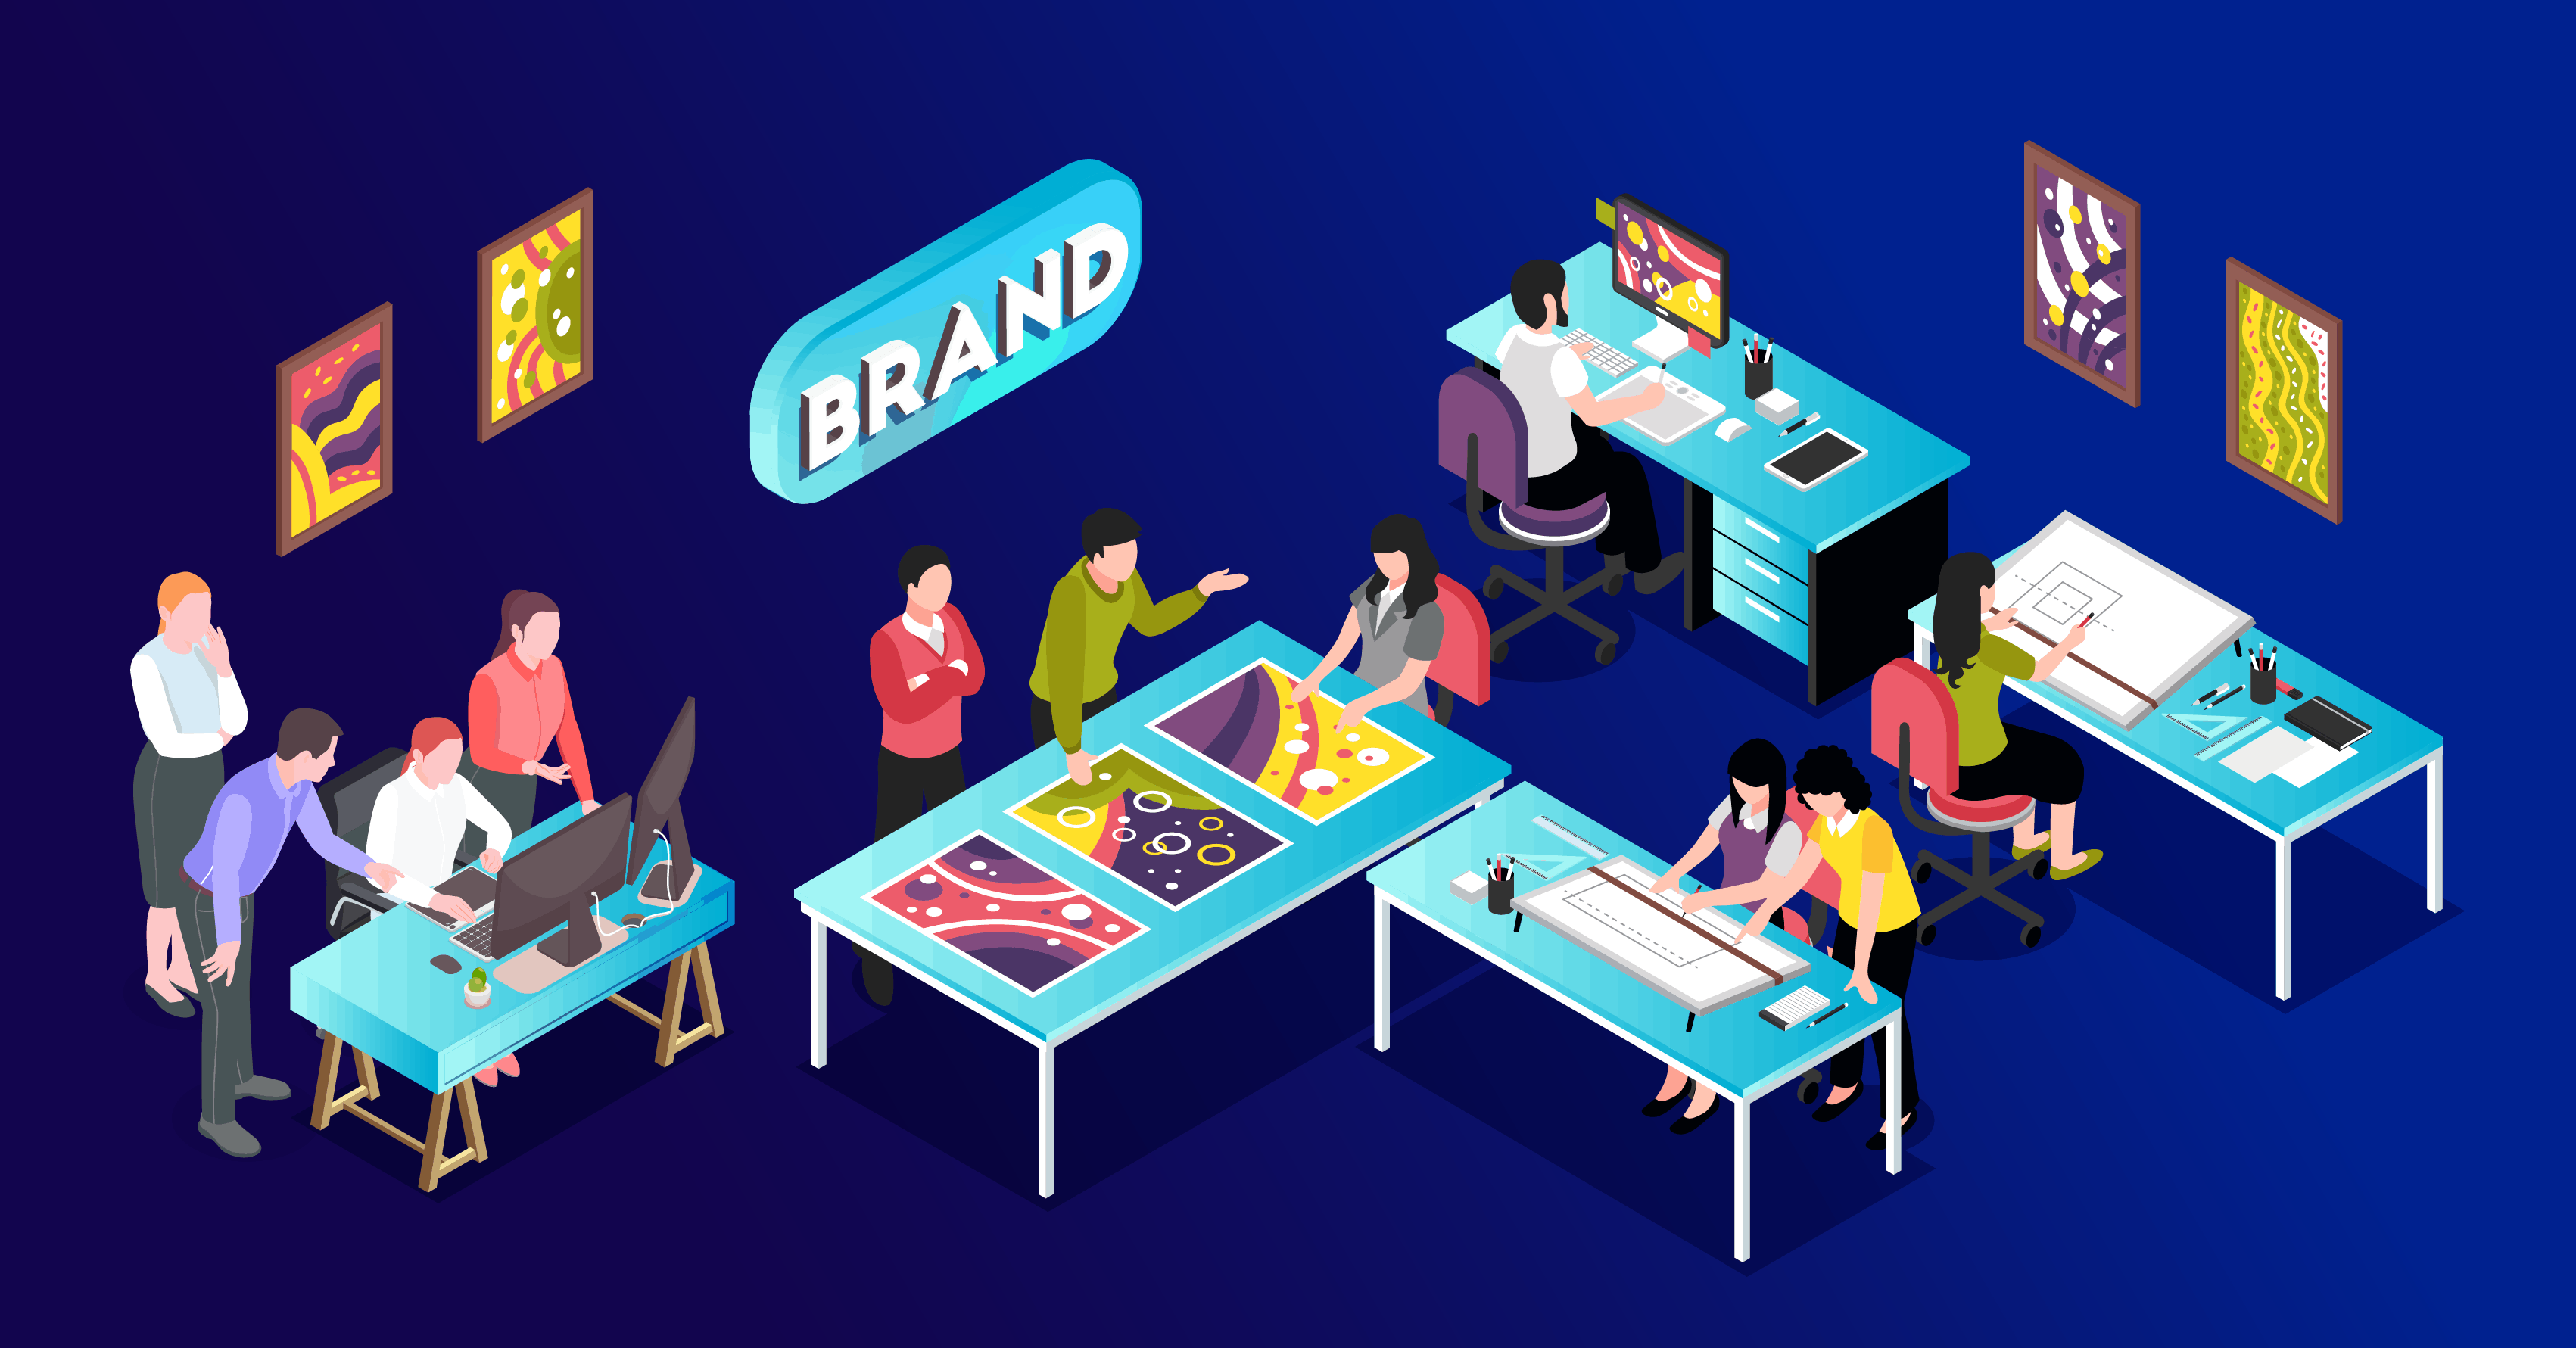 Brand your eCommerce business